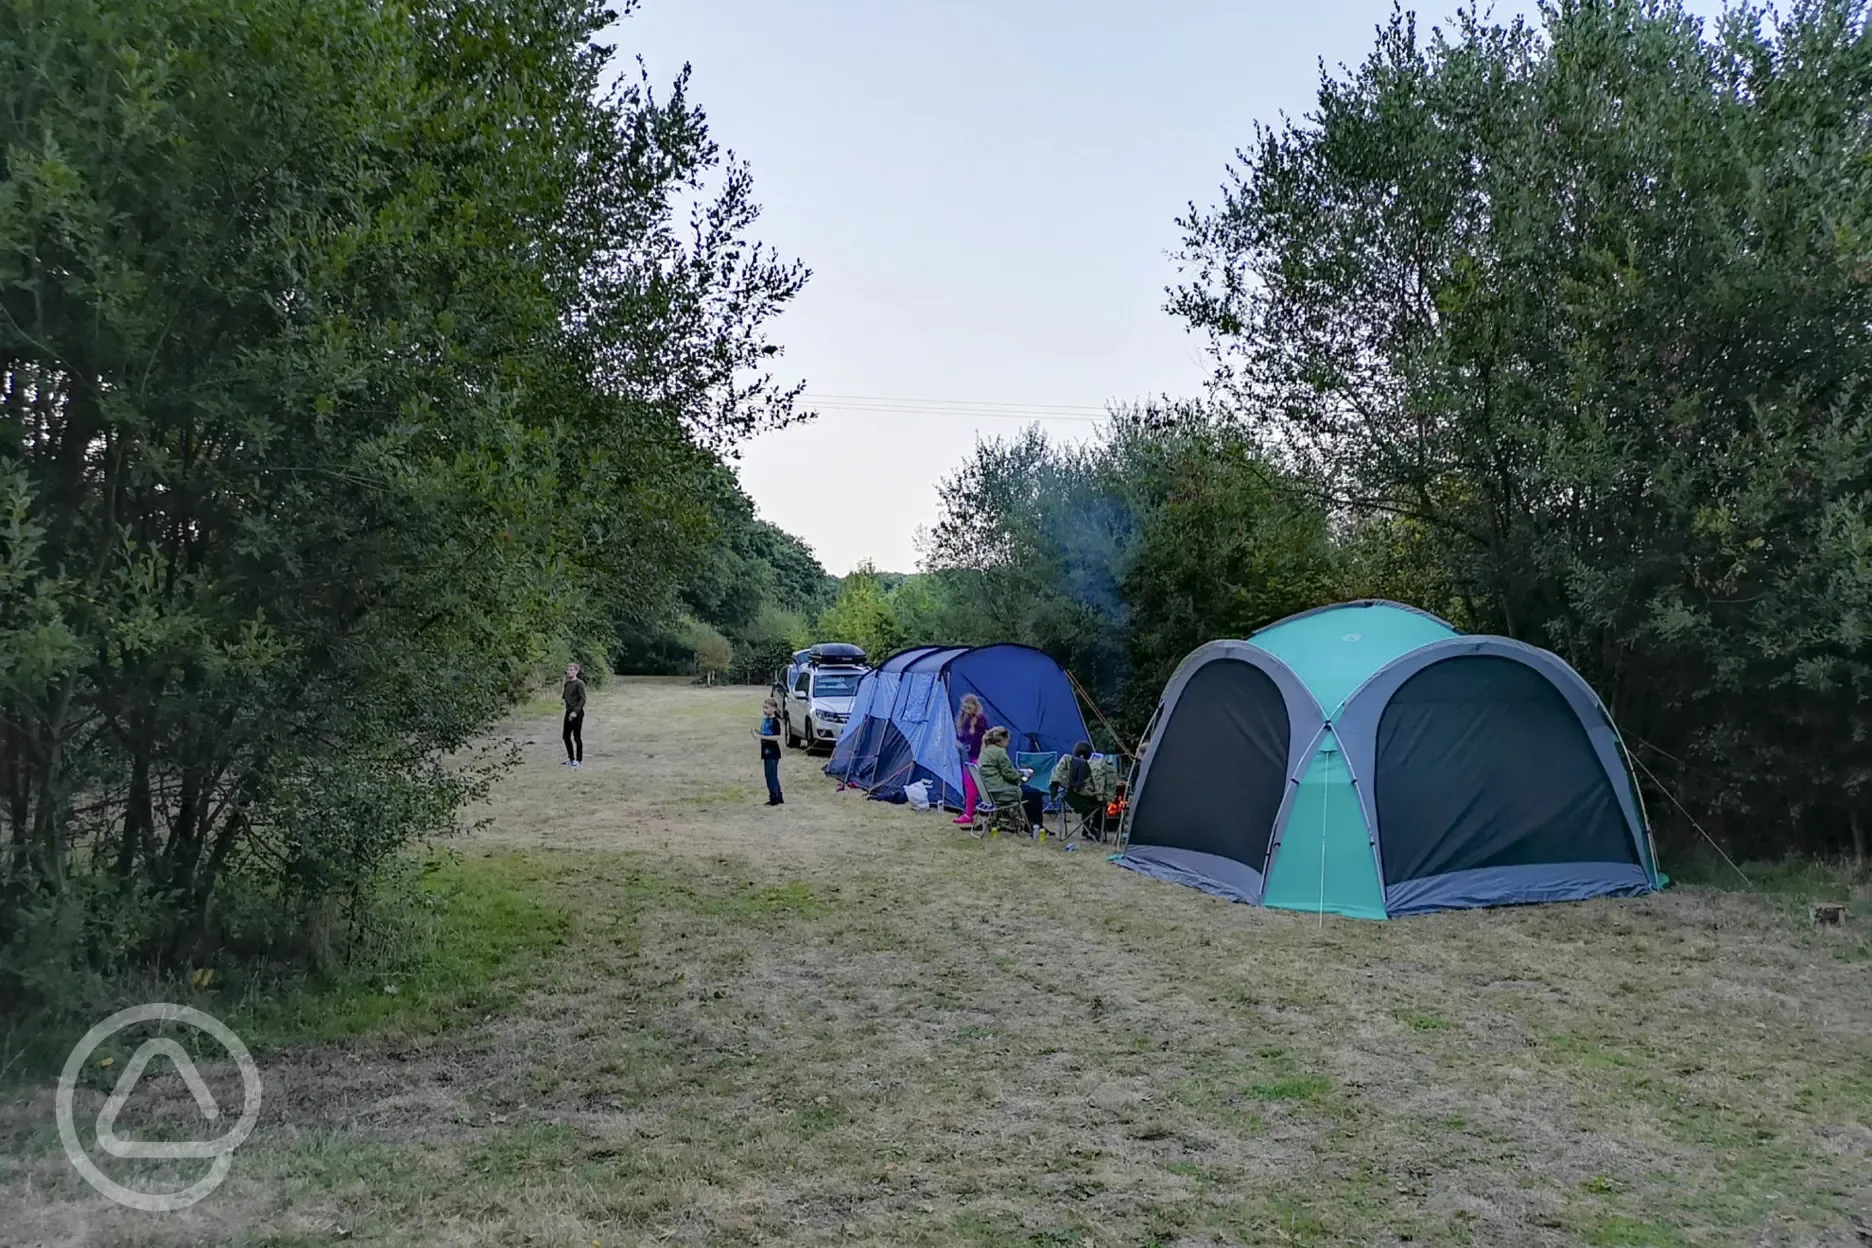 Camping pitches at Camp Wight